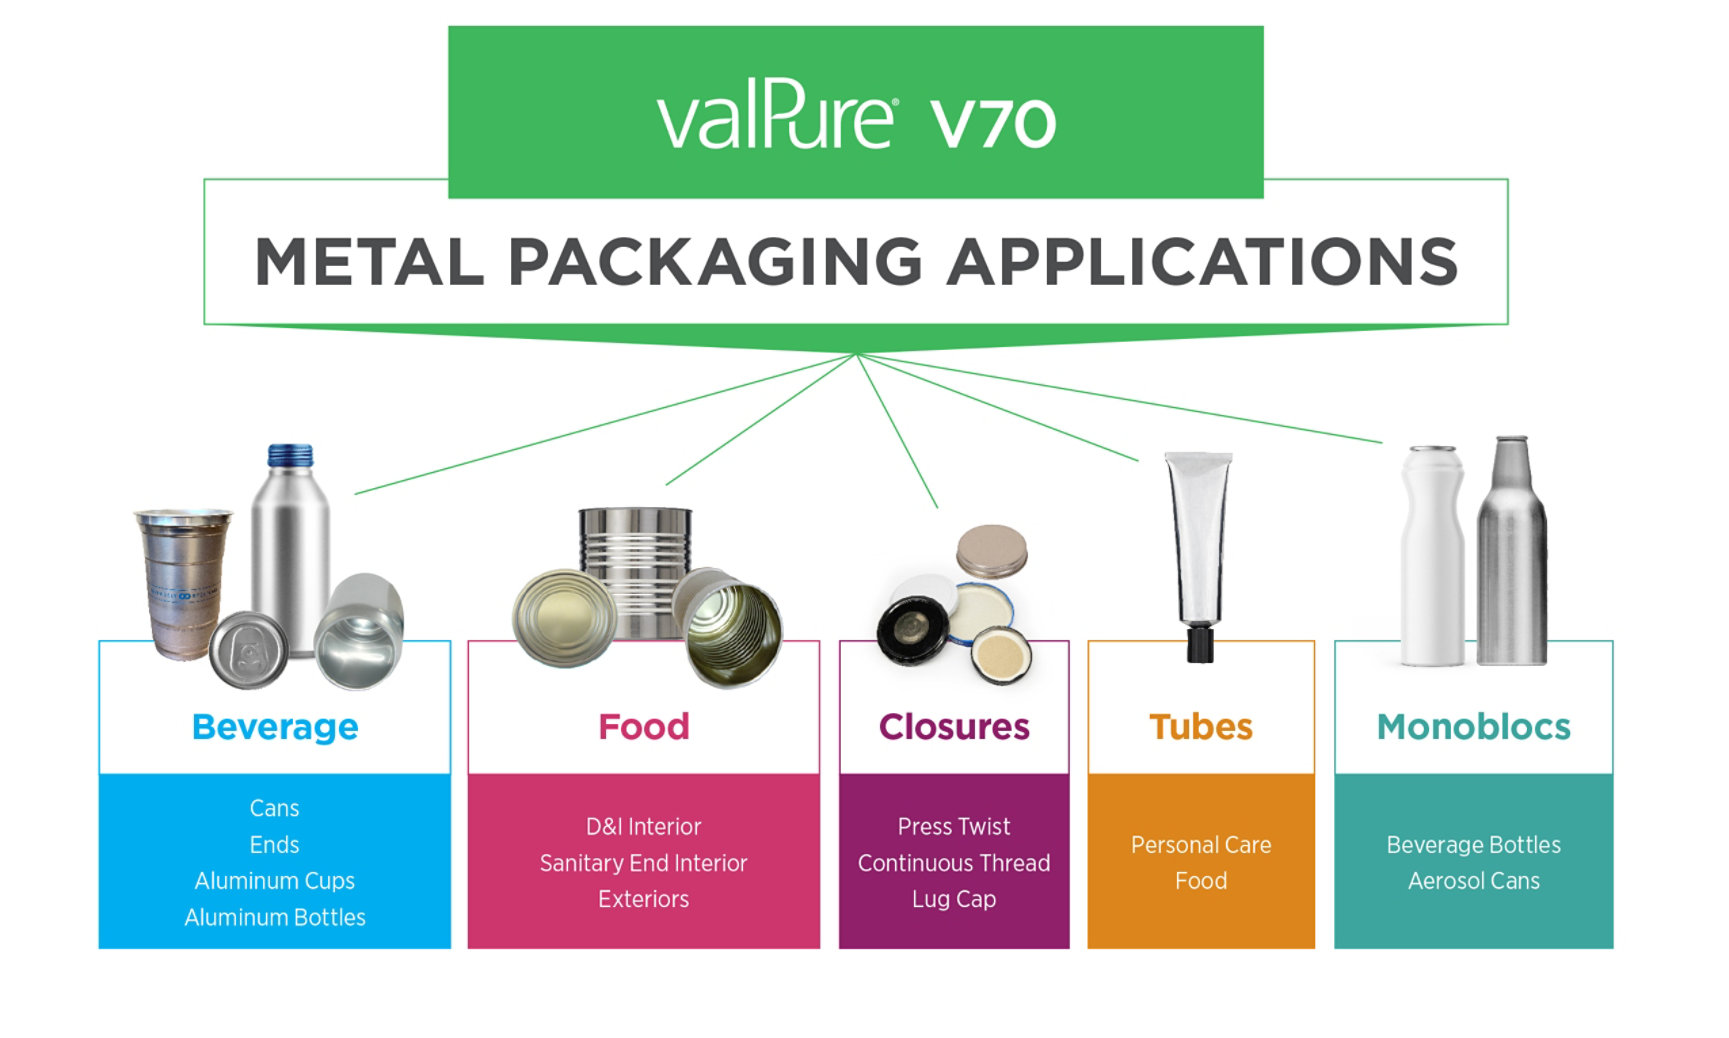 chart depicticting valpure 70 technology and where it can be used for beverage, food and personal care containers